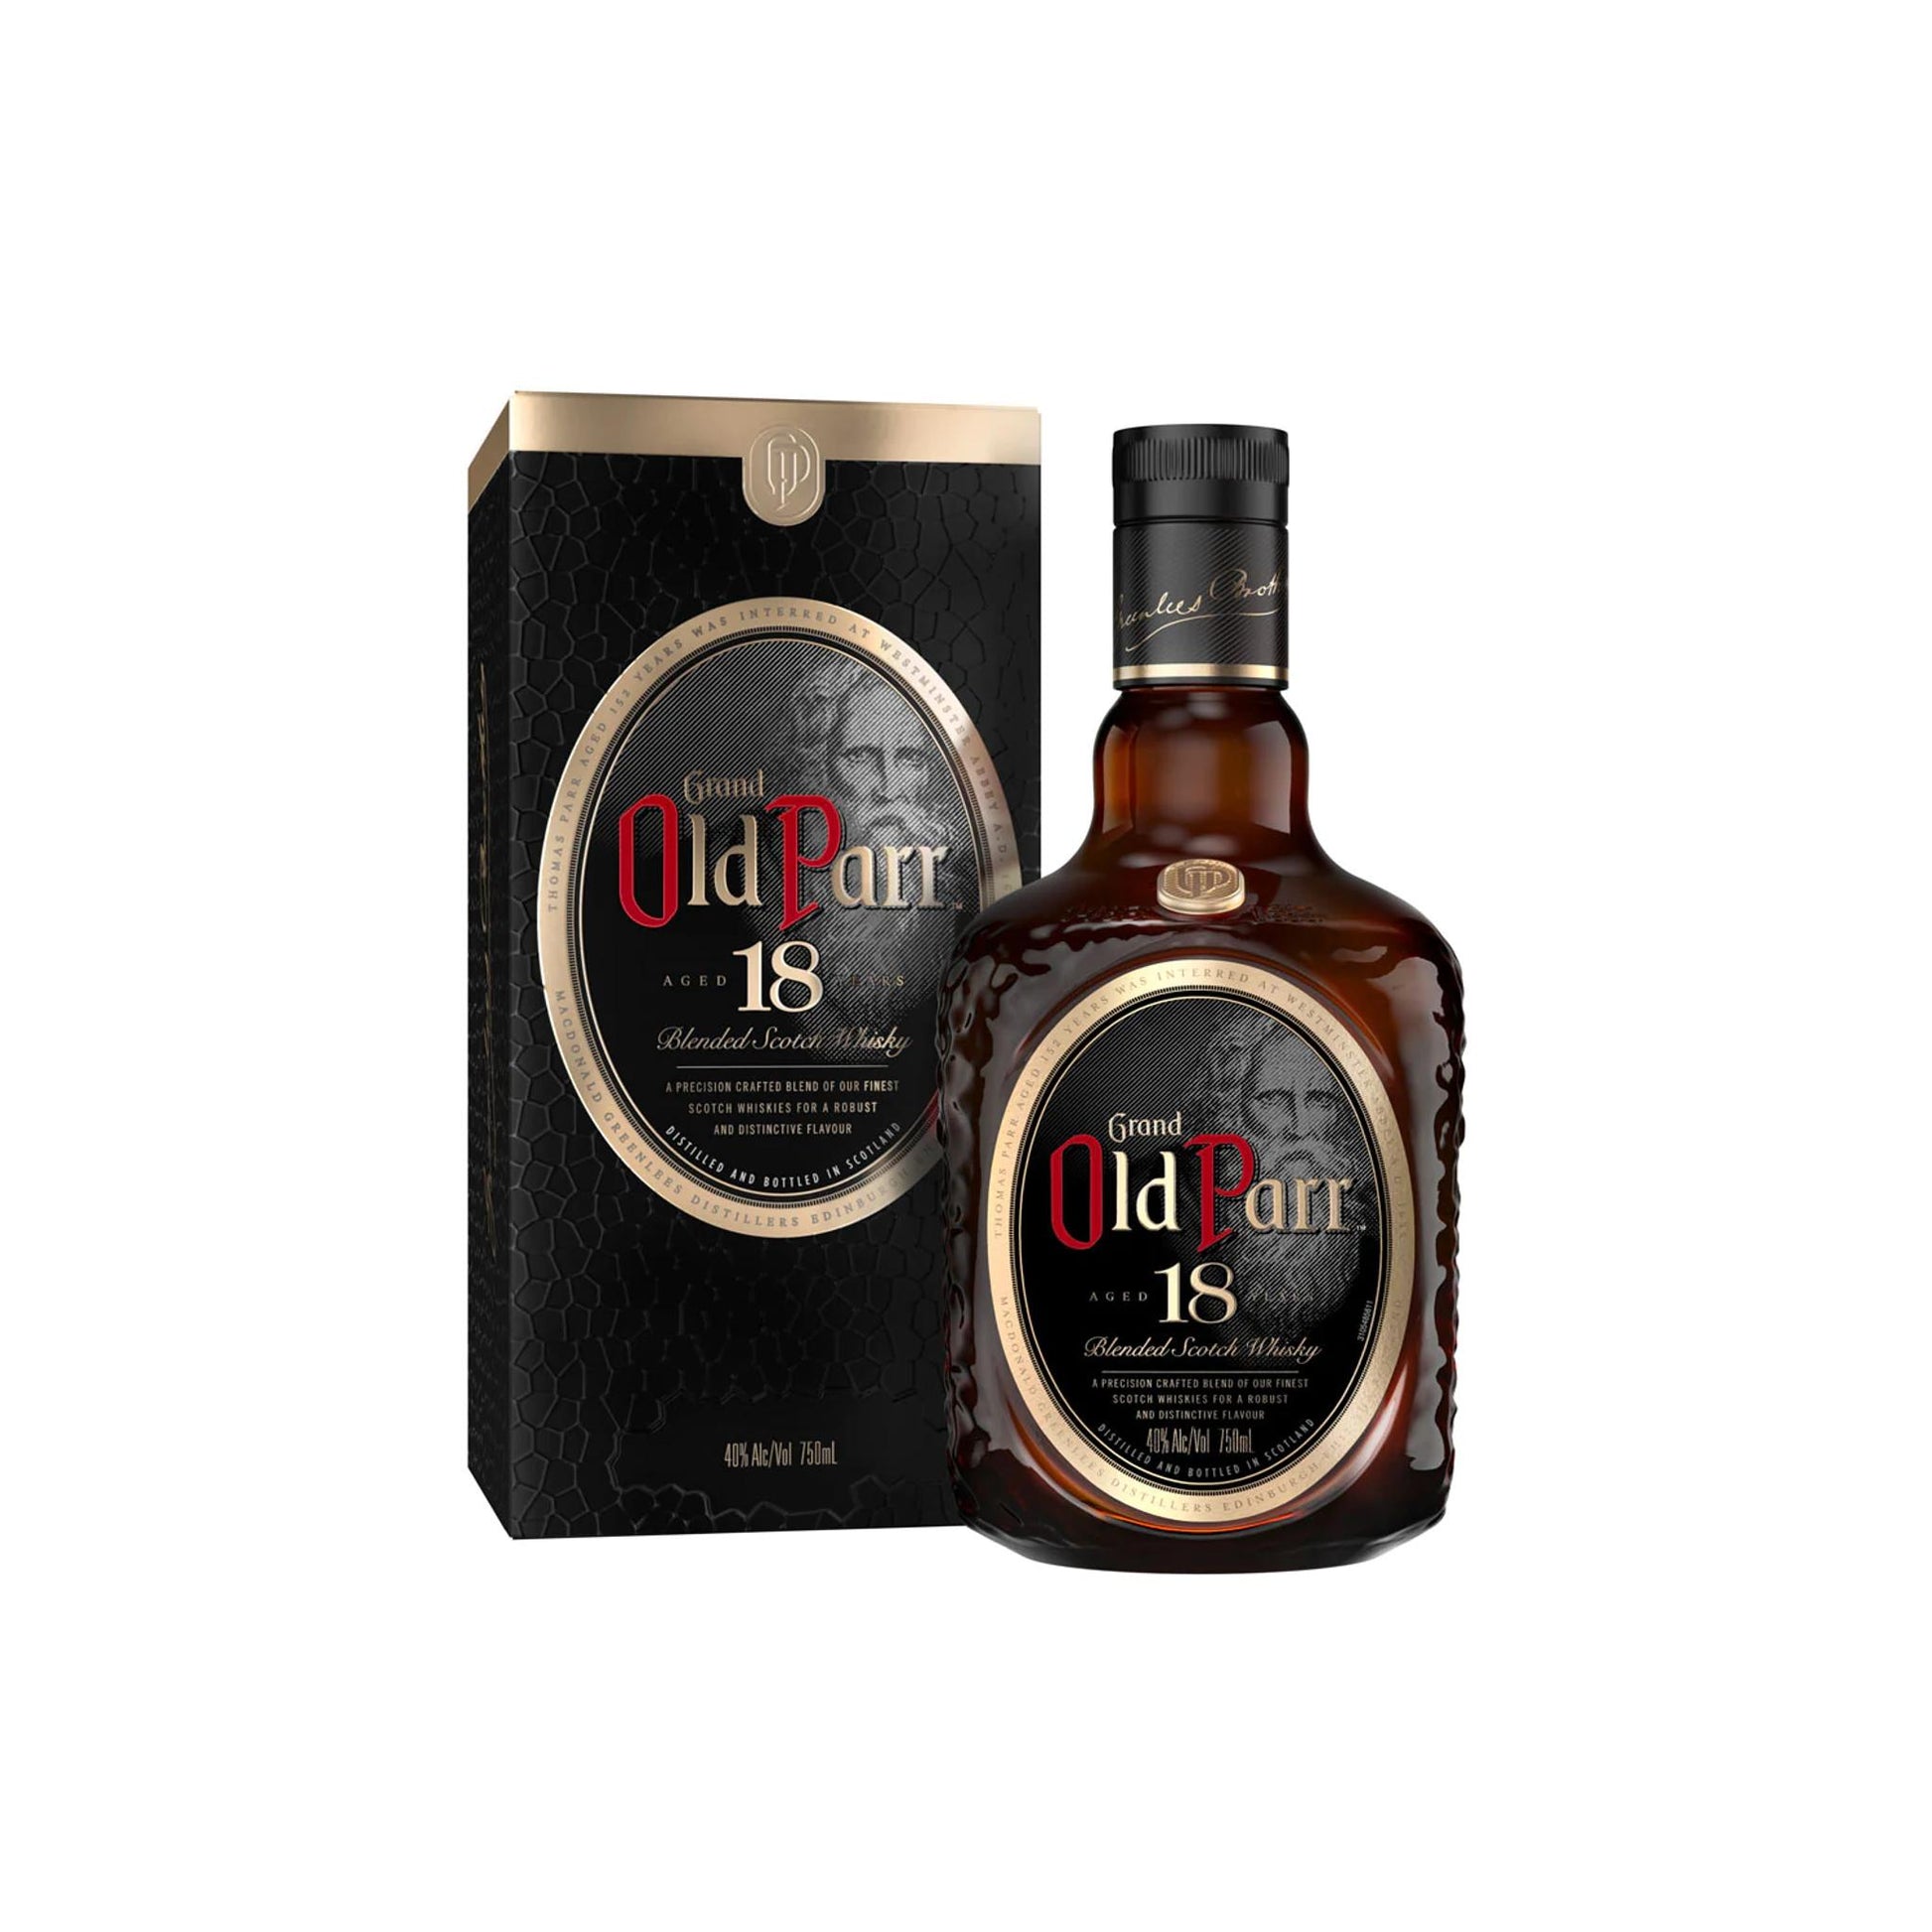 Old Parr Blended Scotch Deluxe 18 Yr - Liquor Geeks